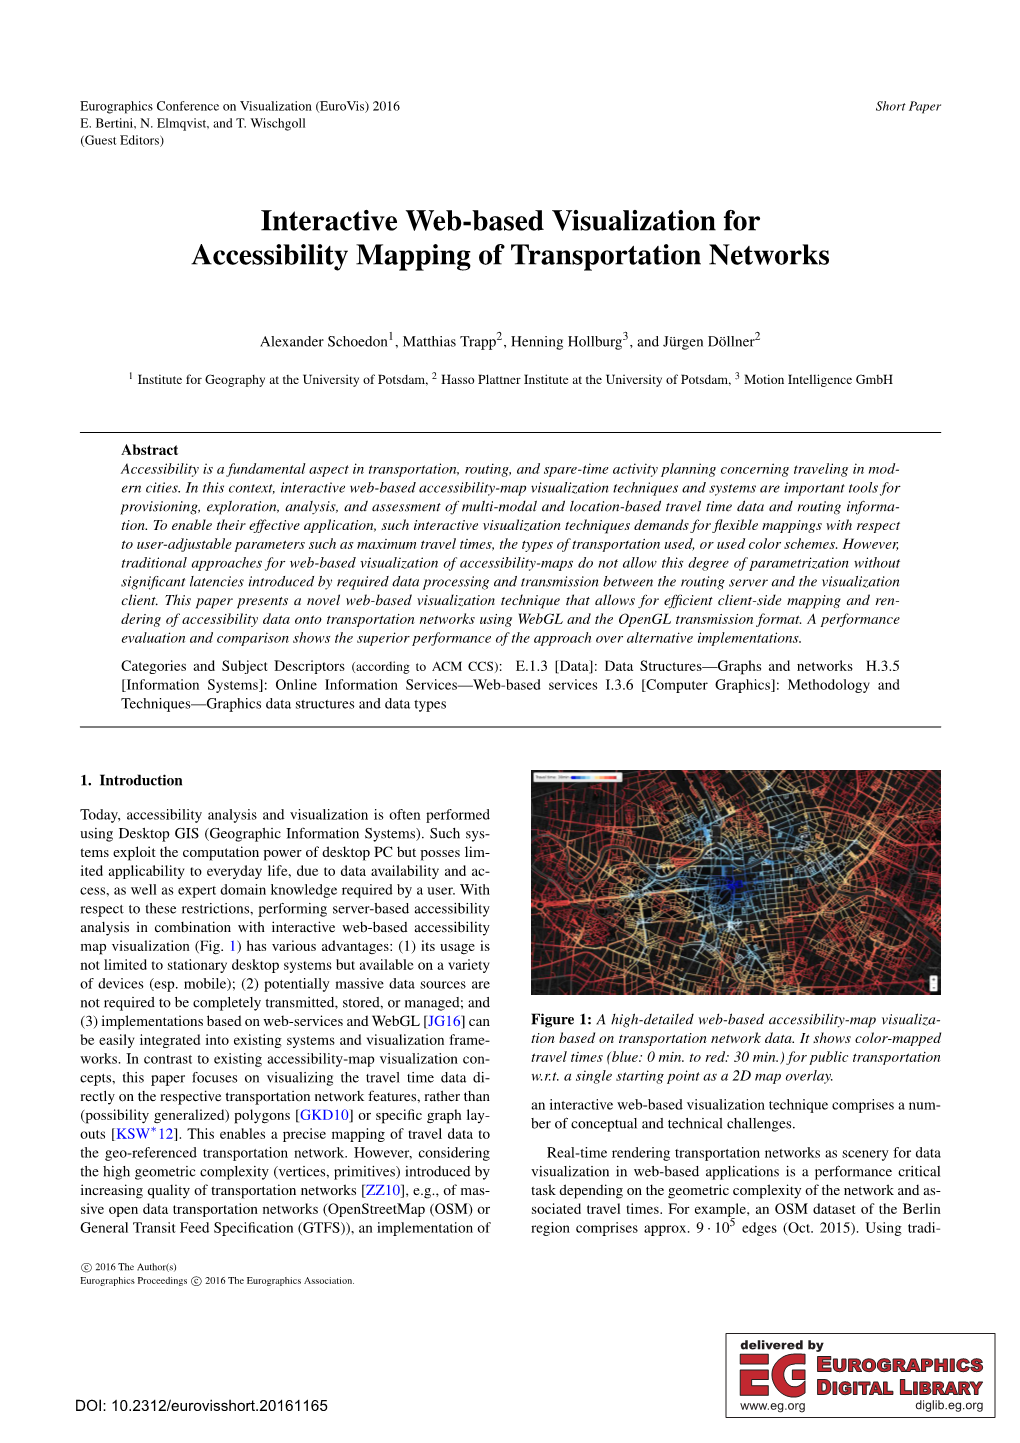 Interactive Web-Based Visualization for Accessibility Mapping of Transportation Networks